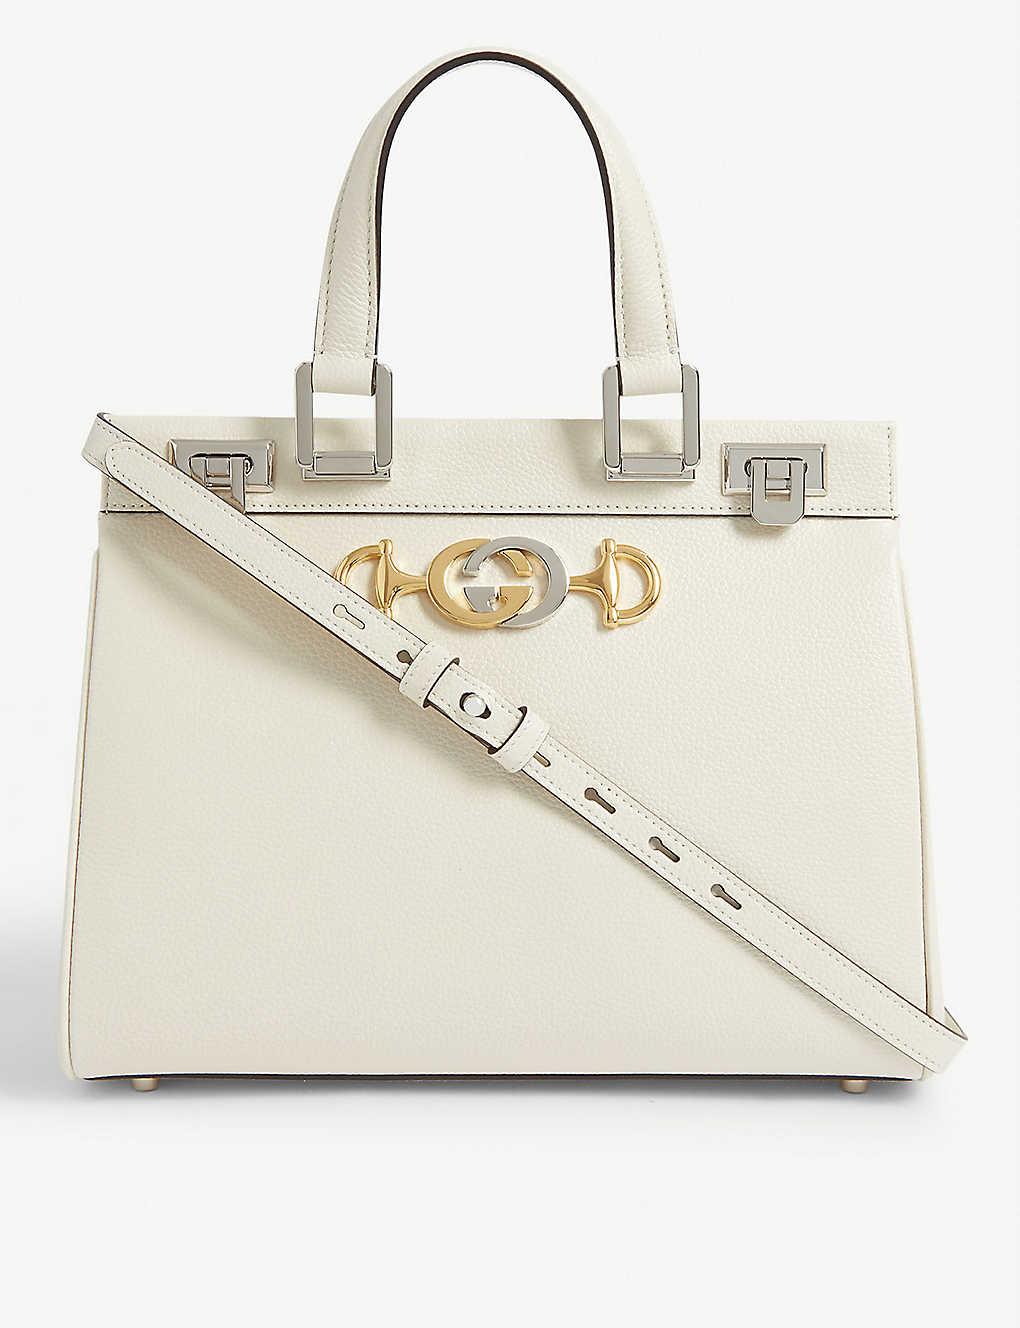 Gucci Zumi Grainy Leather Medium Top Handle Bag in White | Lyst